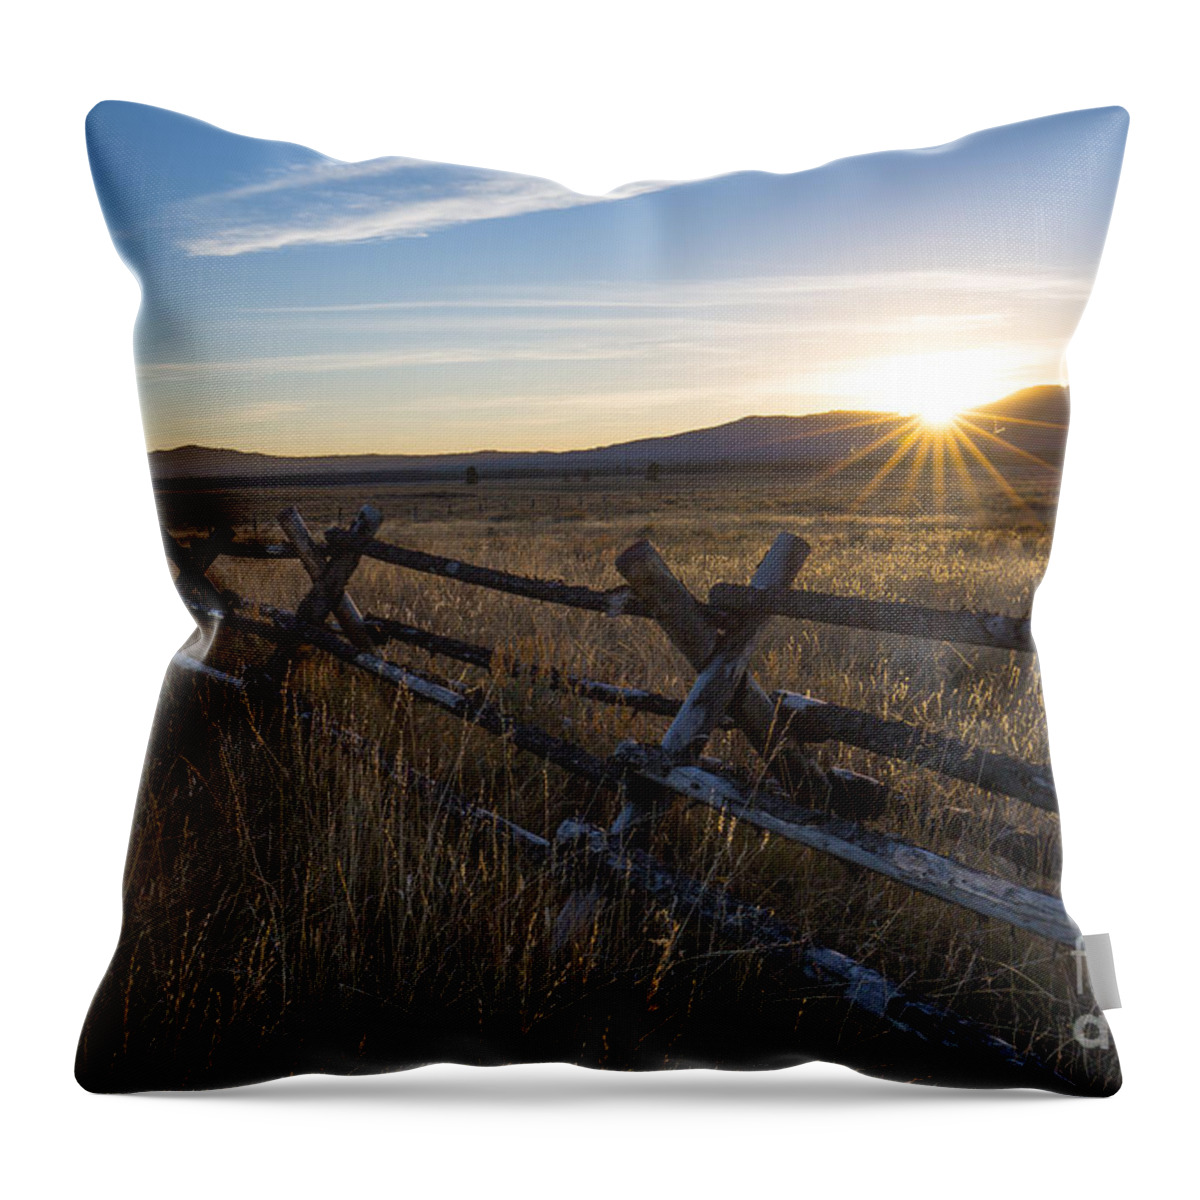 Eastern Idaho Throw Pillow featuring the photograph Railroad Ranch by Idaho Scenic Images Linda Lantzy